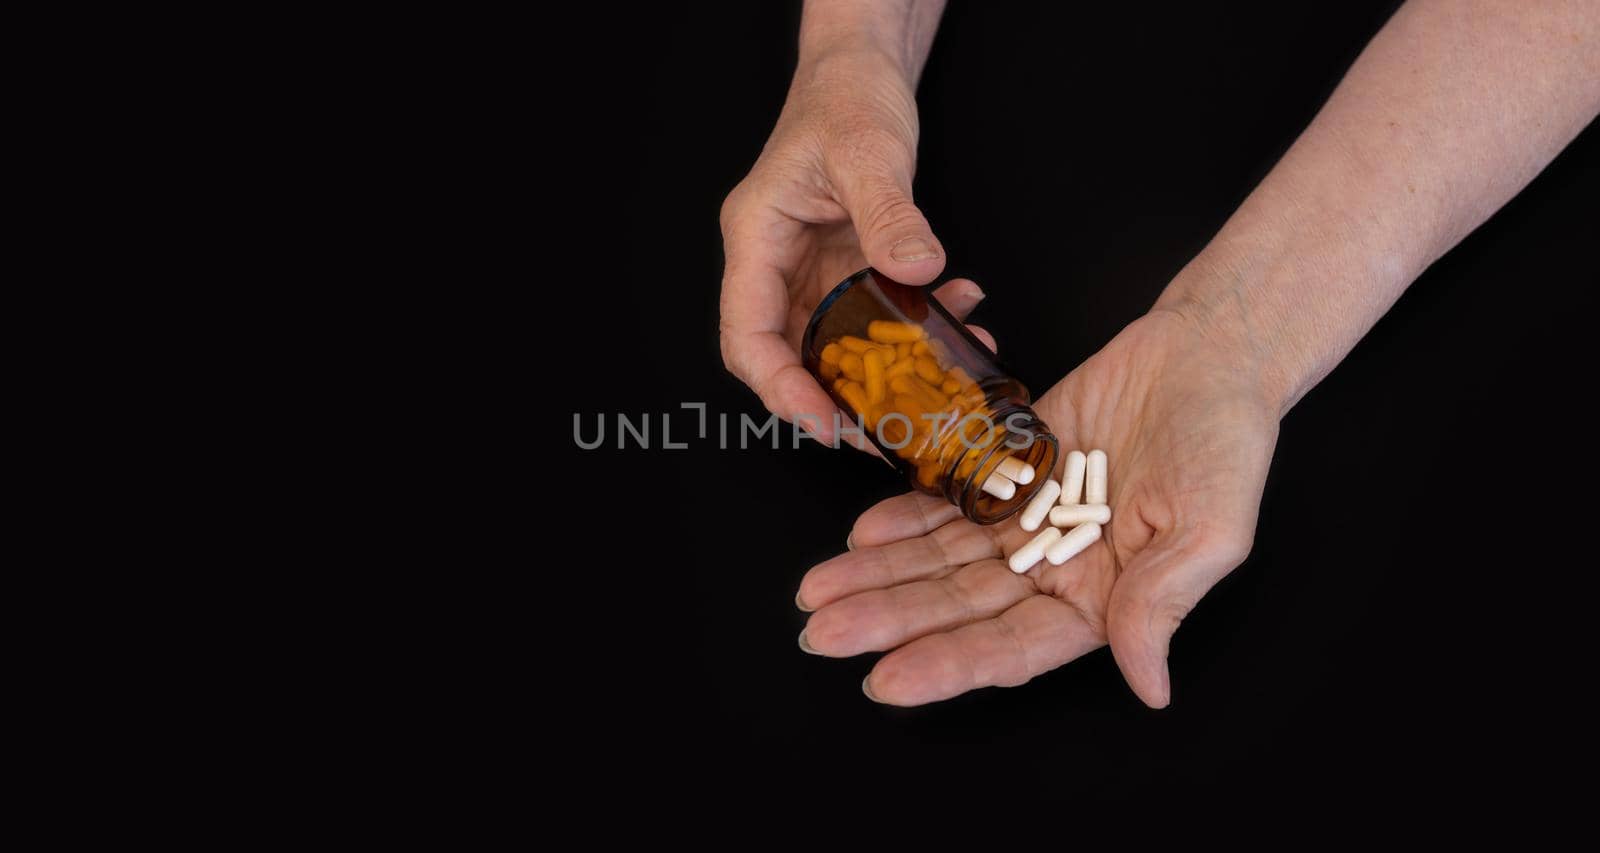 The hands of an elderly woman pour a pill from a jar into her palm. Black background, copy paste for your text. The concept of medicine, diseases of the elderly, prevention, taking vitamins